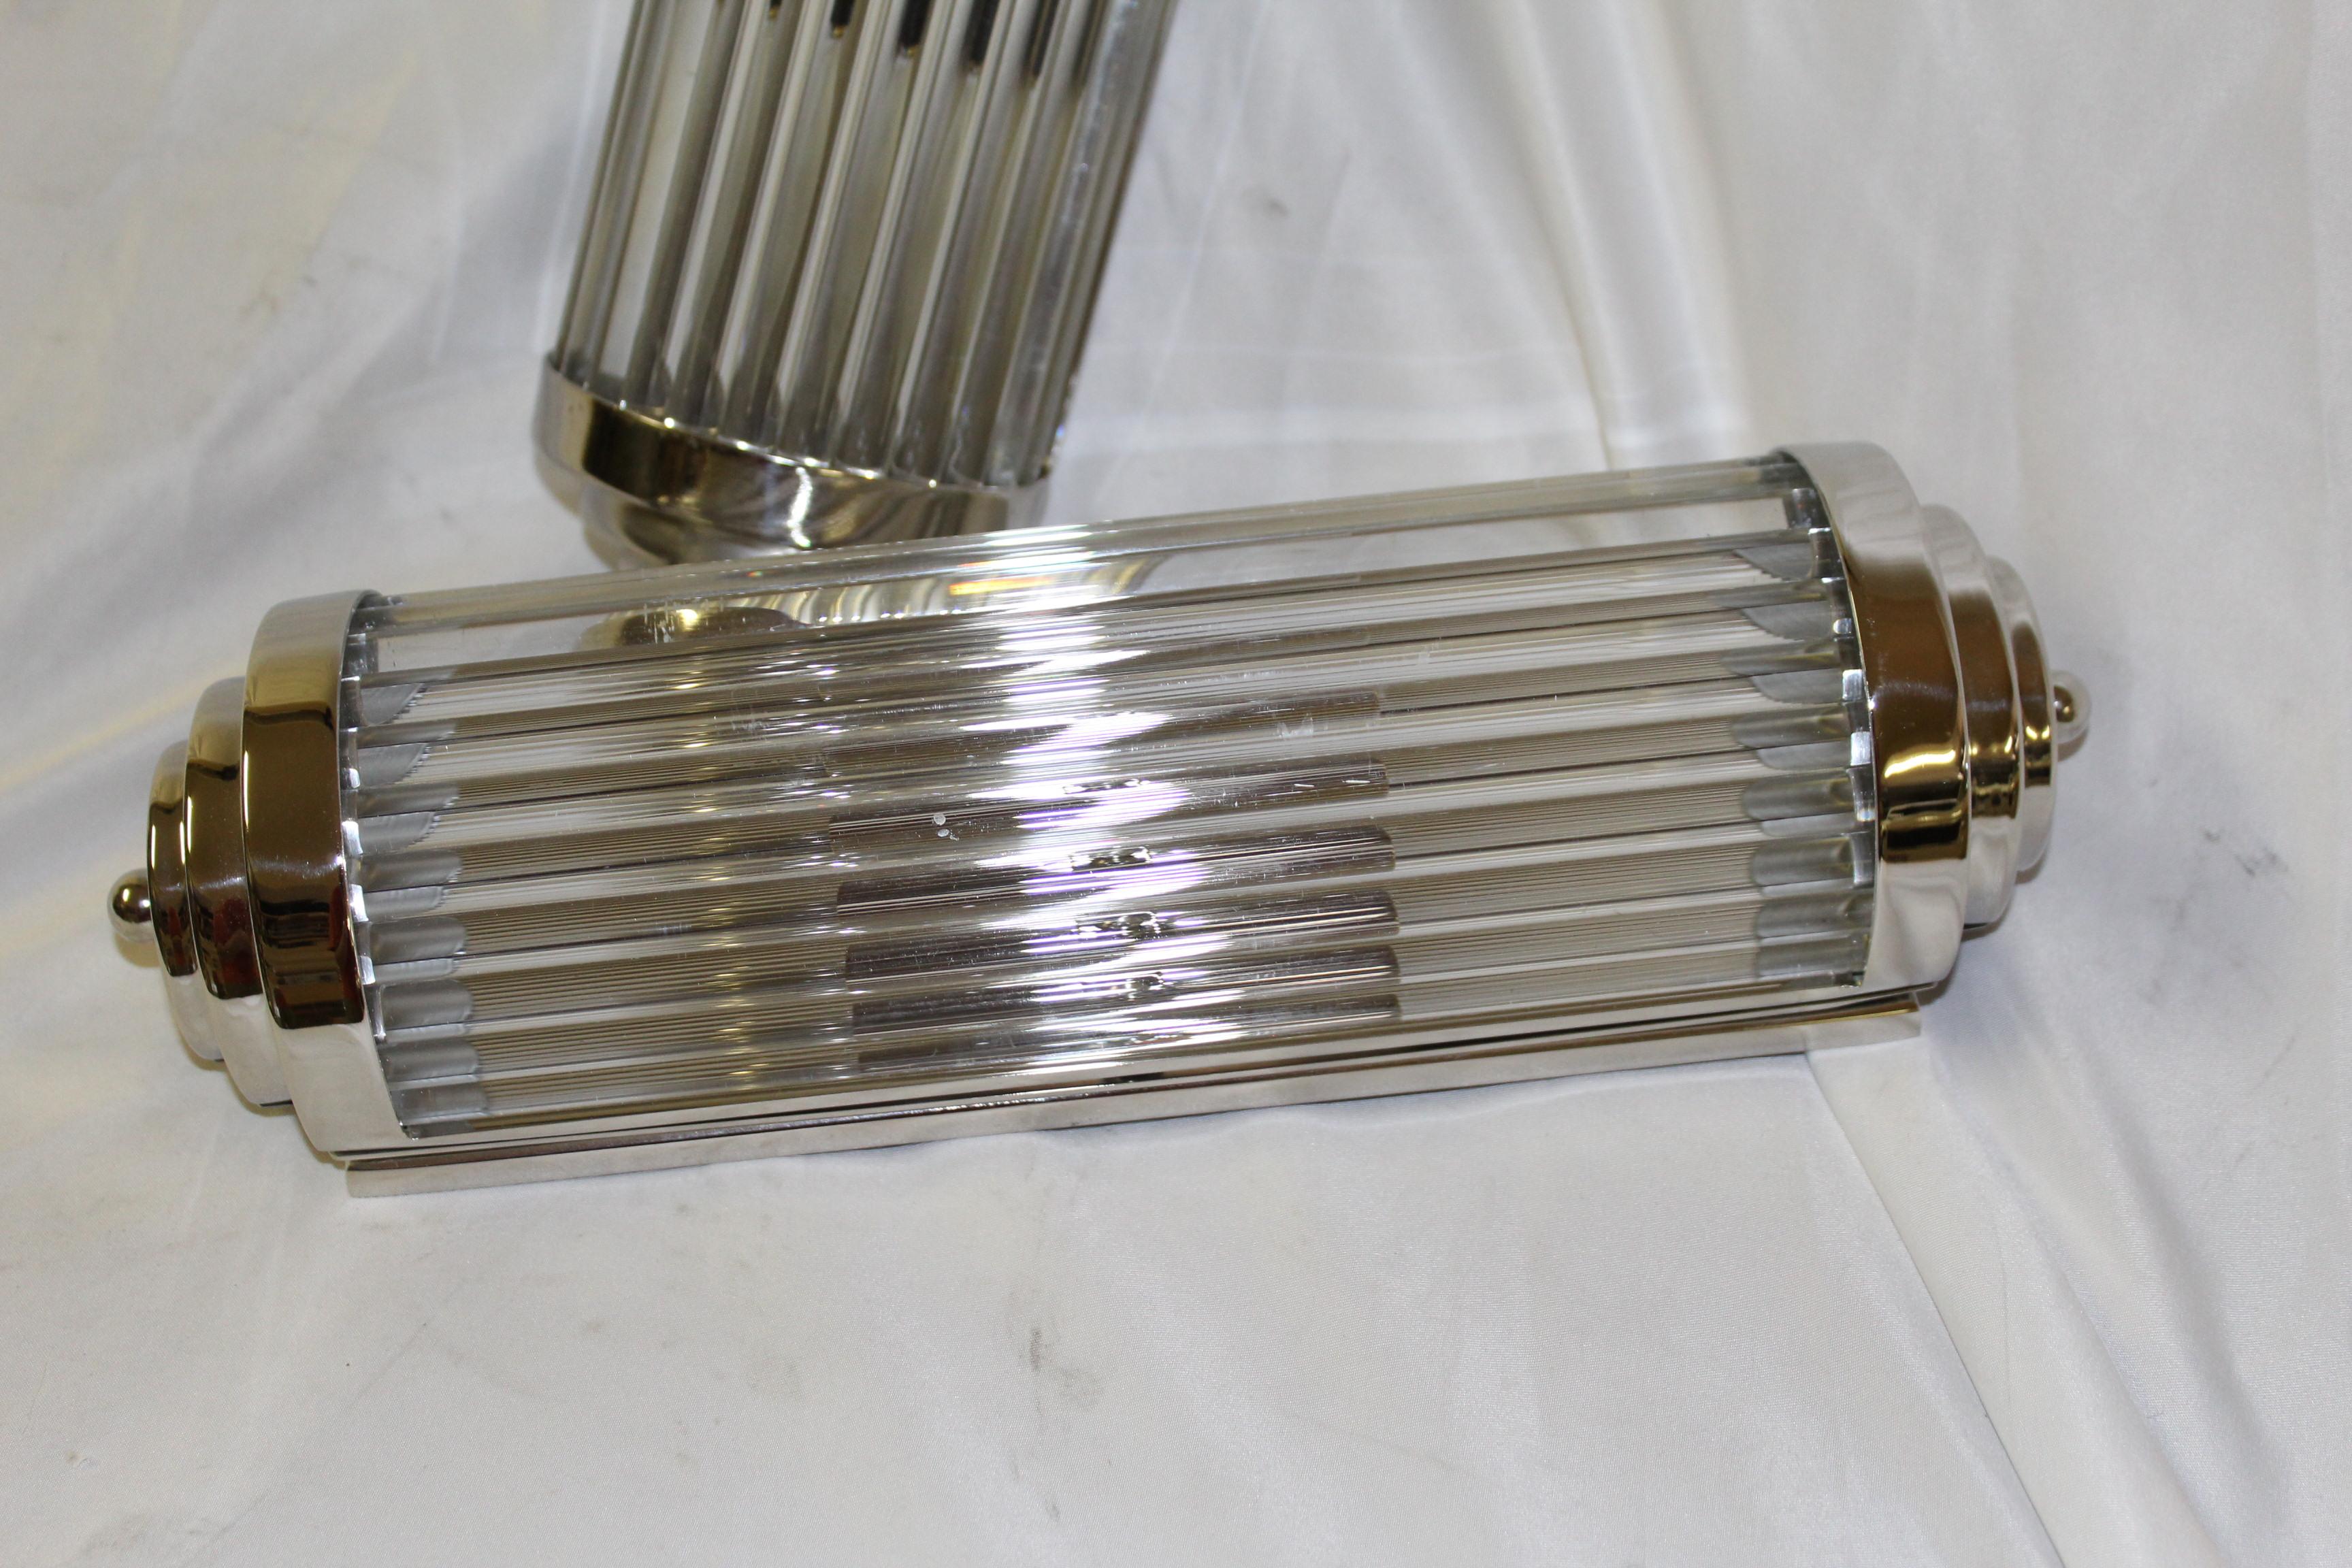 Hi polished nickel finish deco sconces, all glass rods handcut individually to fit. Has a double candelabra socket assembly with nickel cover. Can mount either vertically or horizontally. A great looking deco sconce. Measures:  12